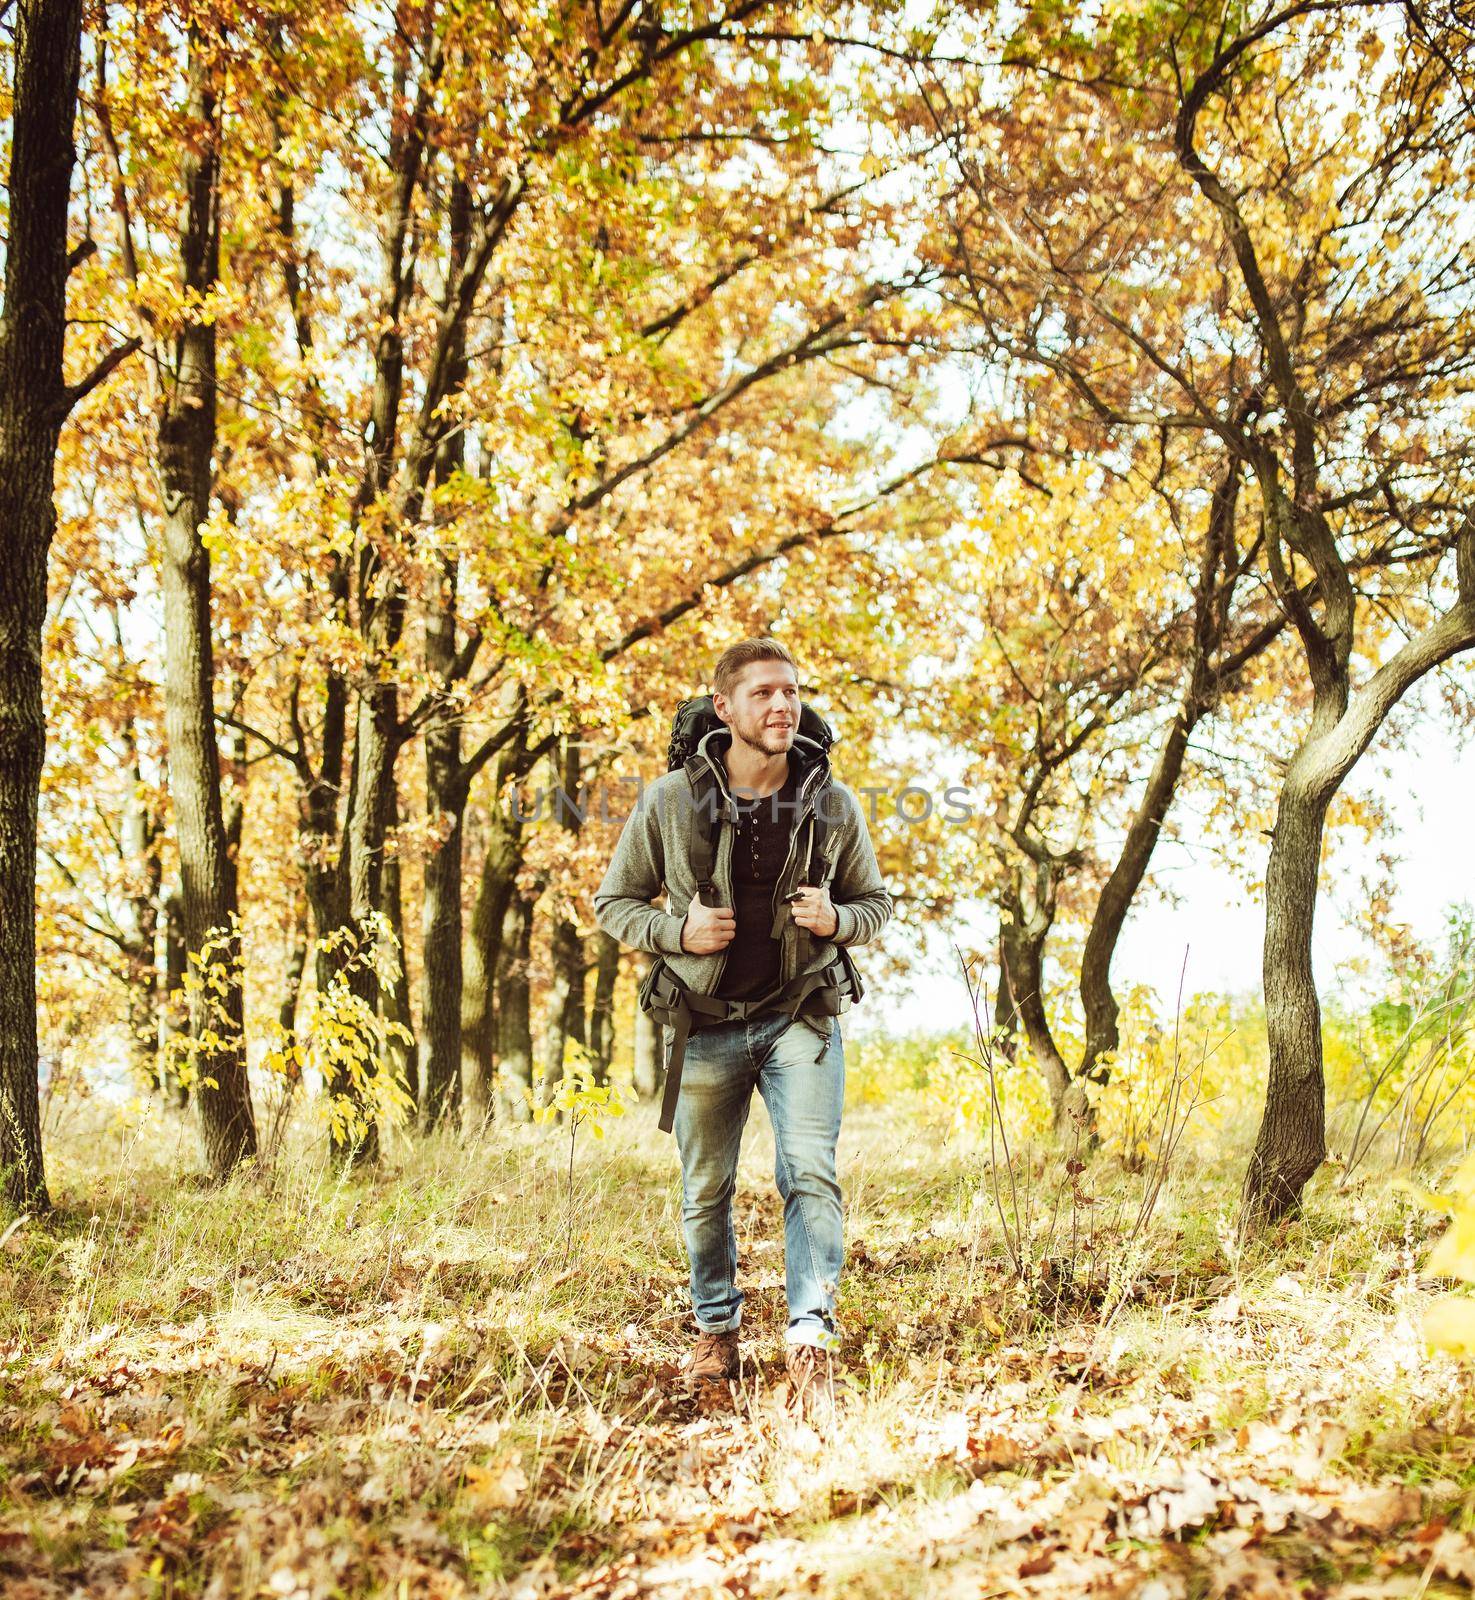 Traveler backpacker walking in autumn forest, young caucasian man in gray jacket goes along the trail admiring beauty of nature on sunny day. Hiking concept.